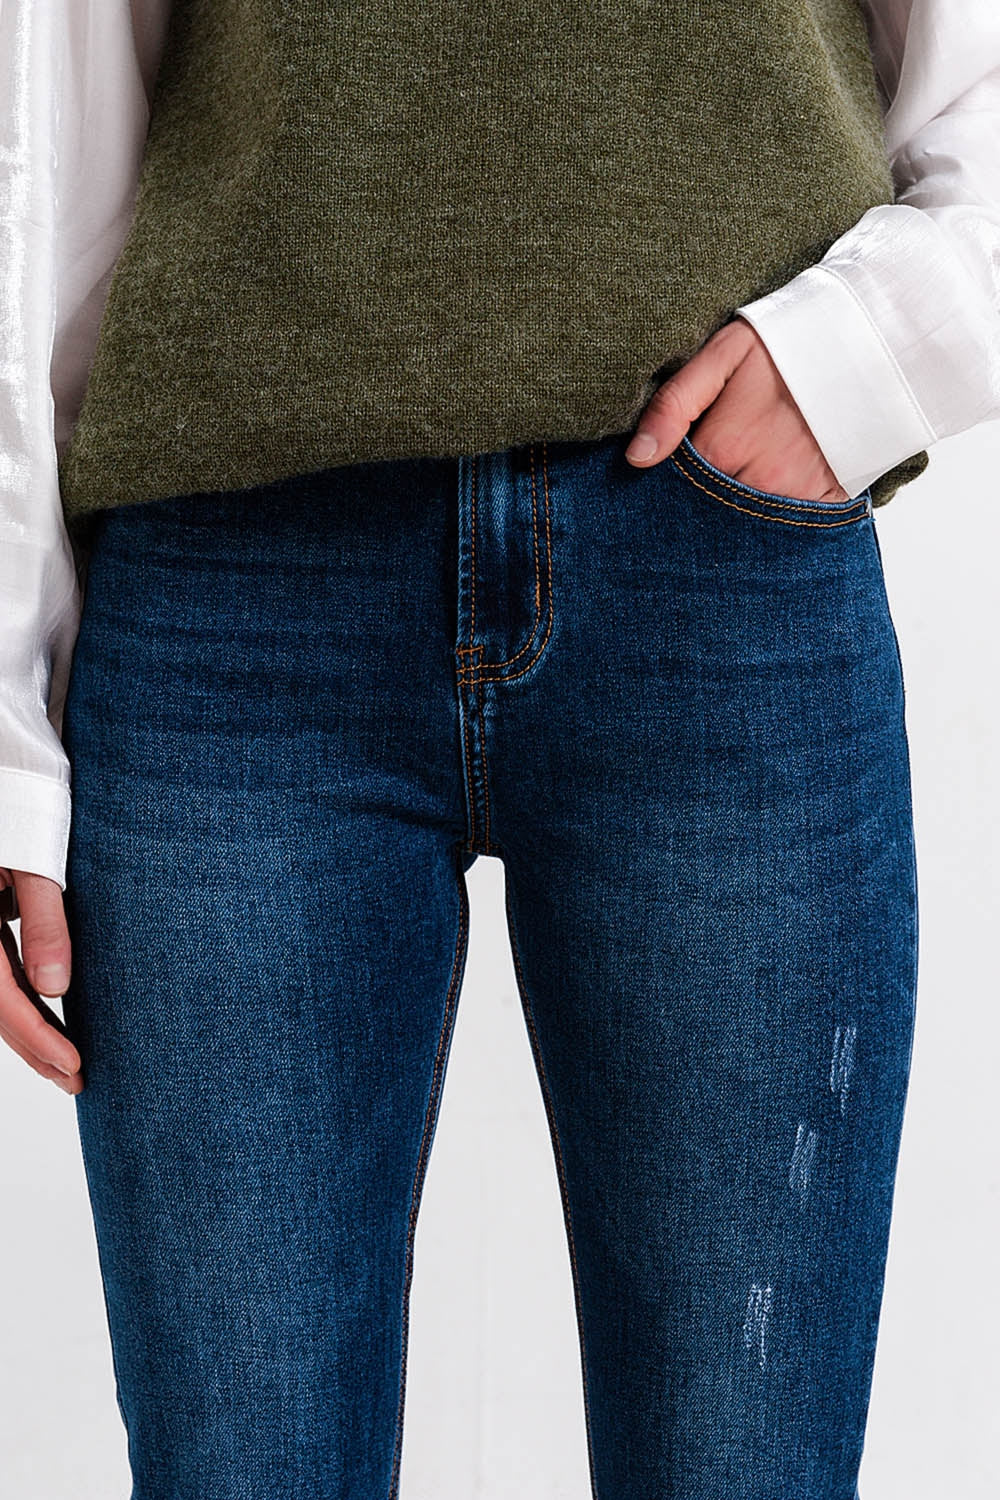 High Waisted Skinny Jeans in Blue Wash